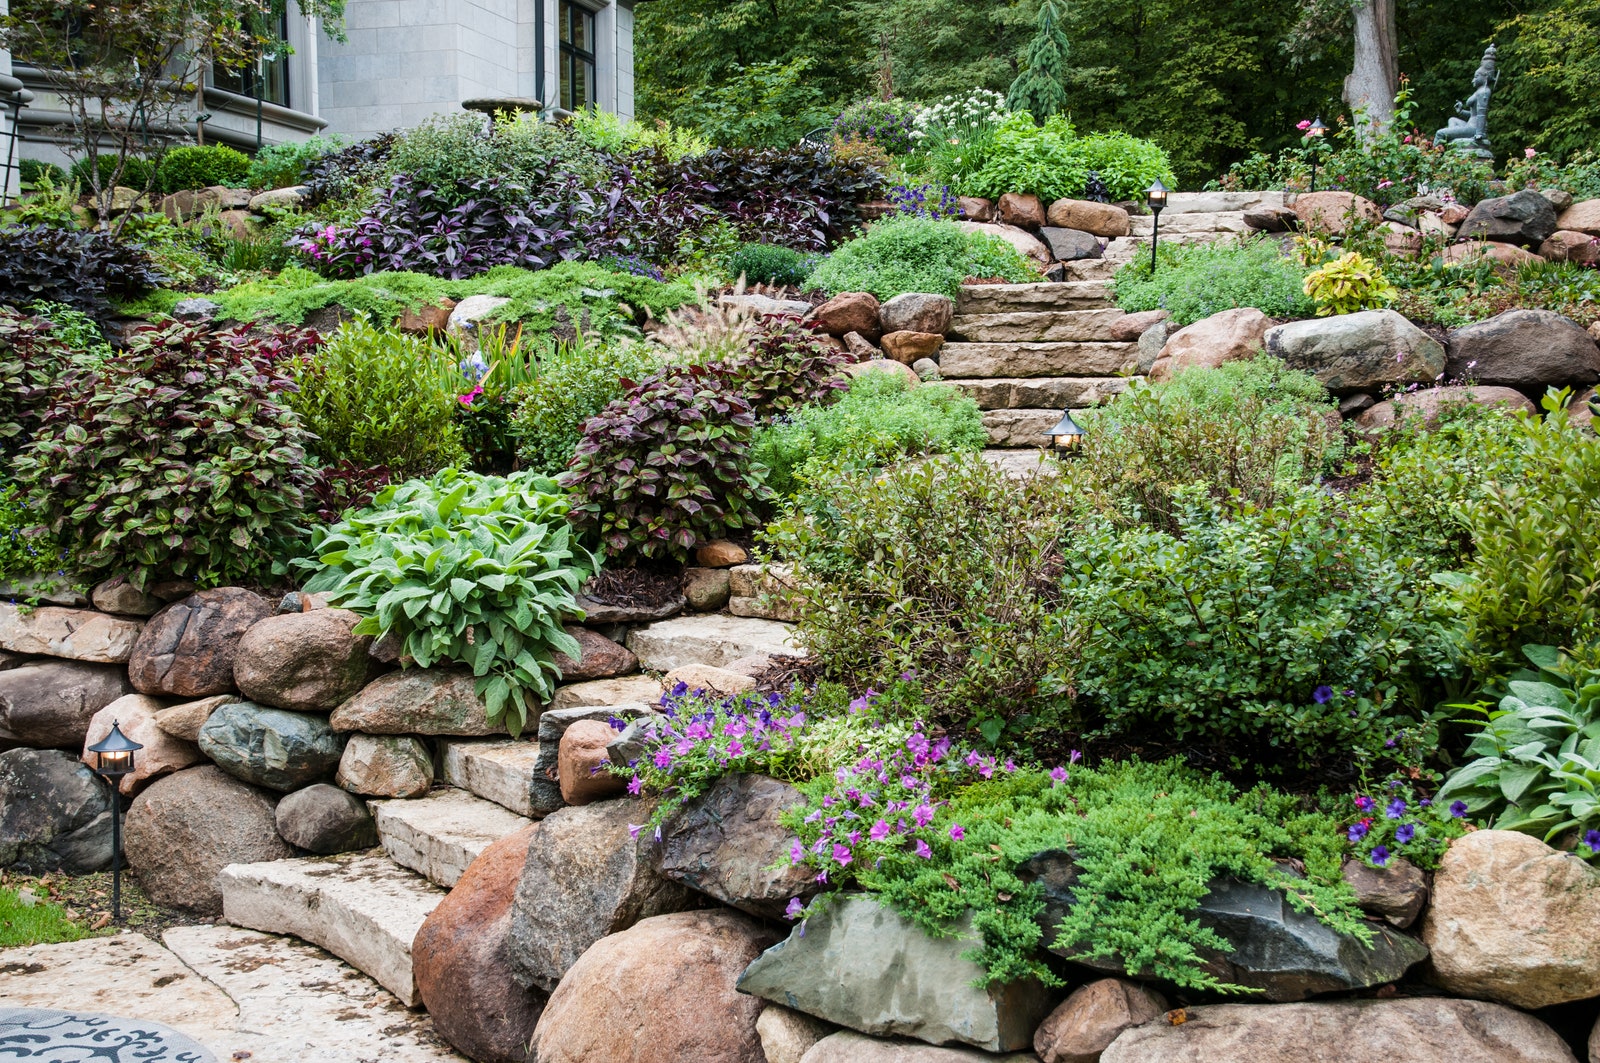 Stone by stone Big boulders give landscaping organic structure.